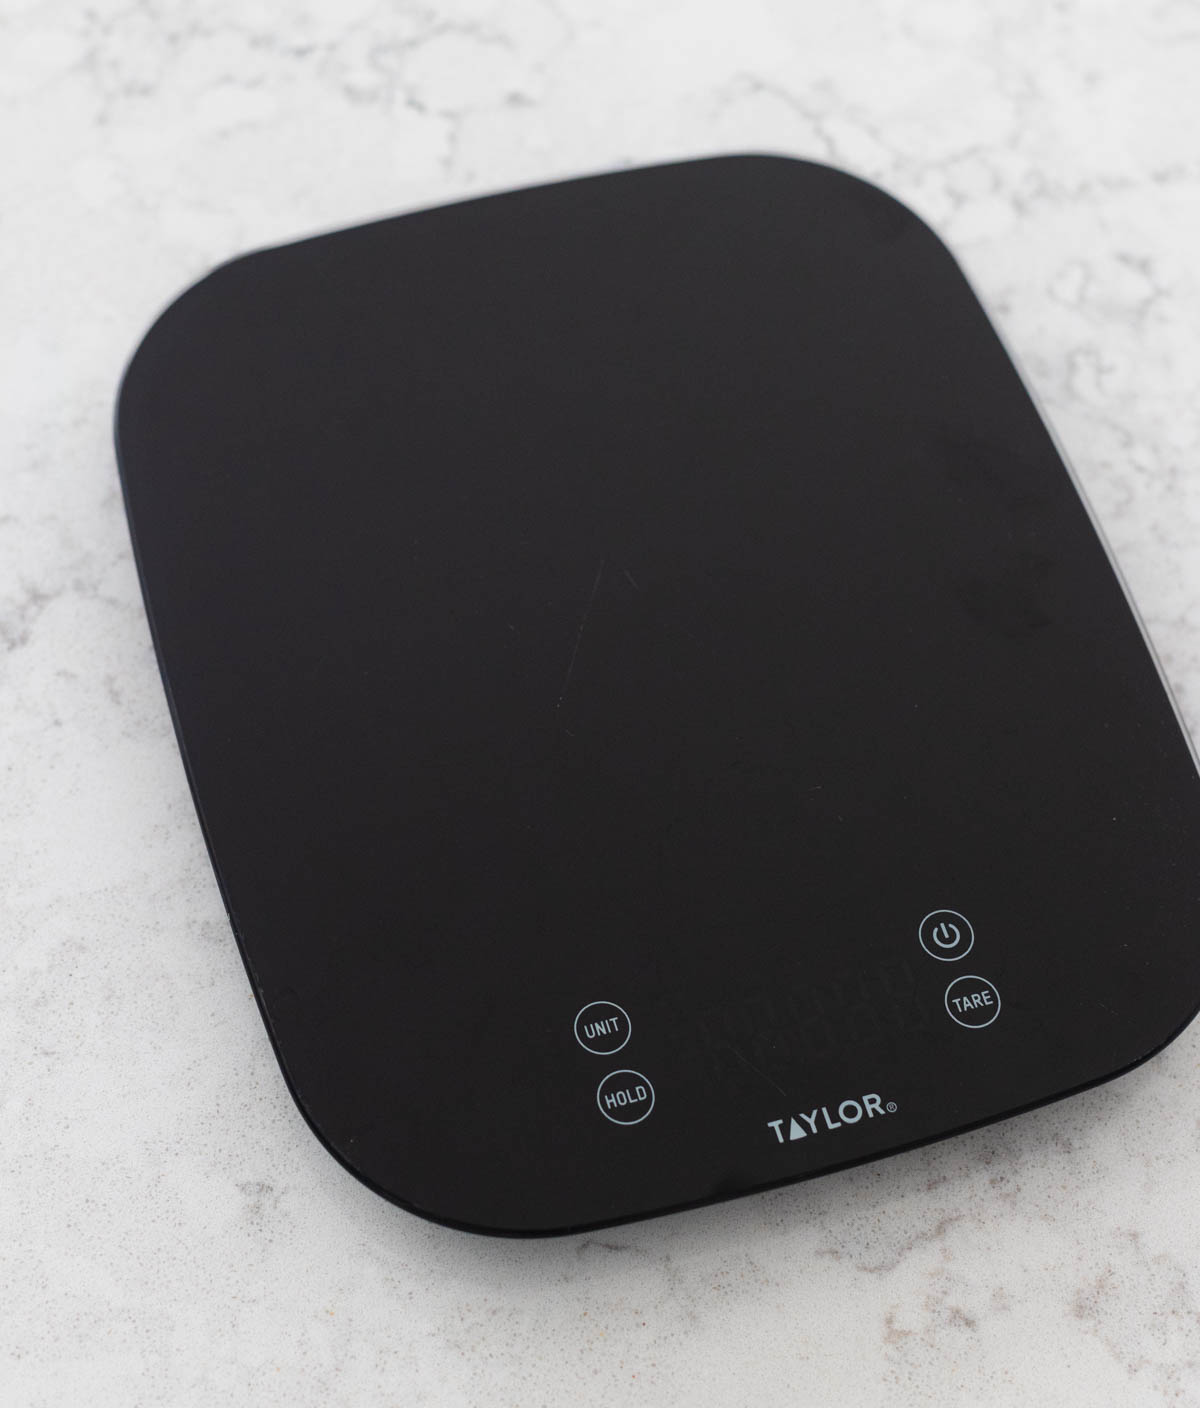 A black digital food scale is on the kitchen counter.